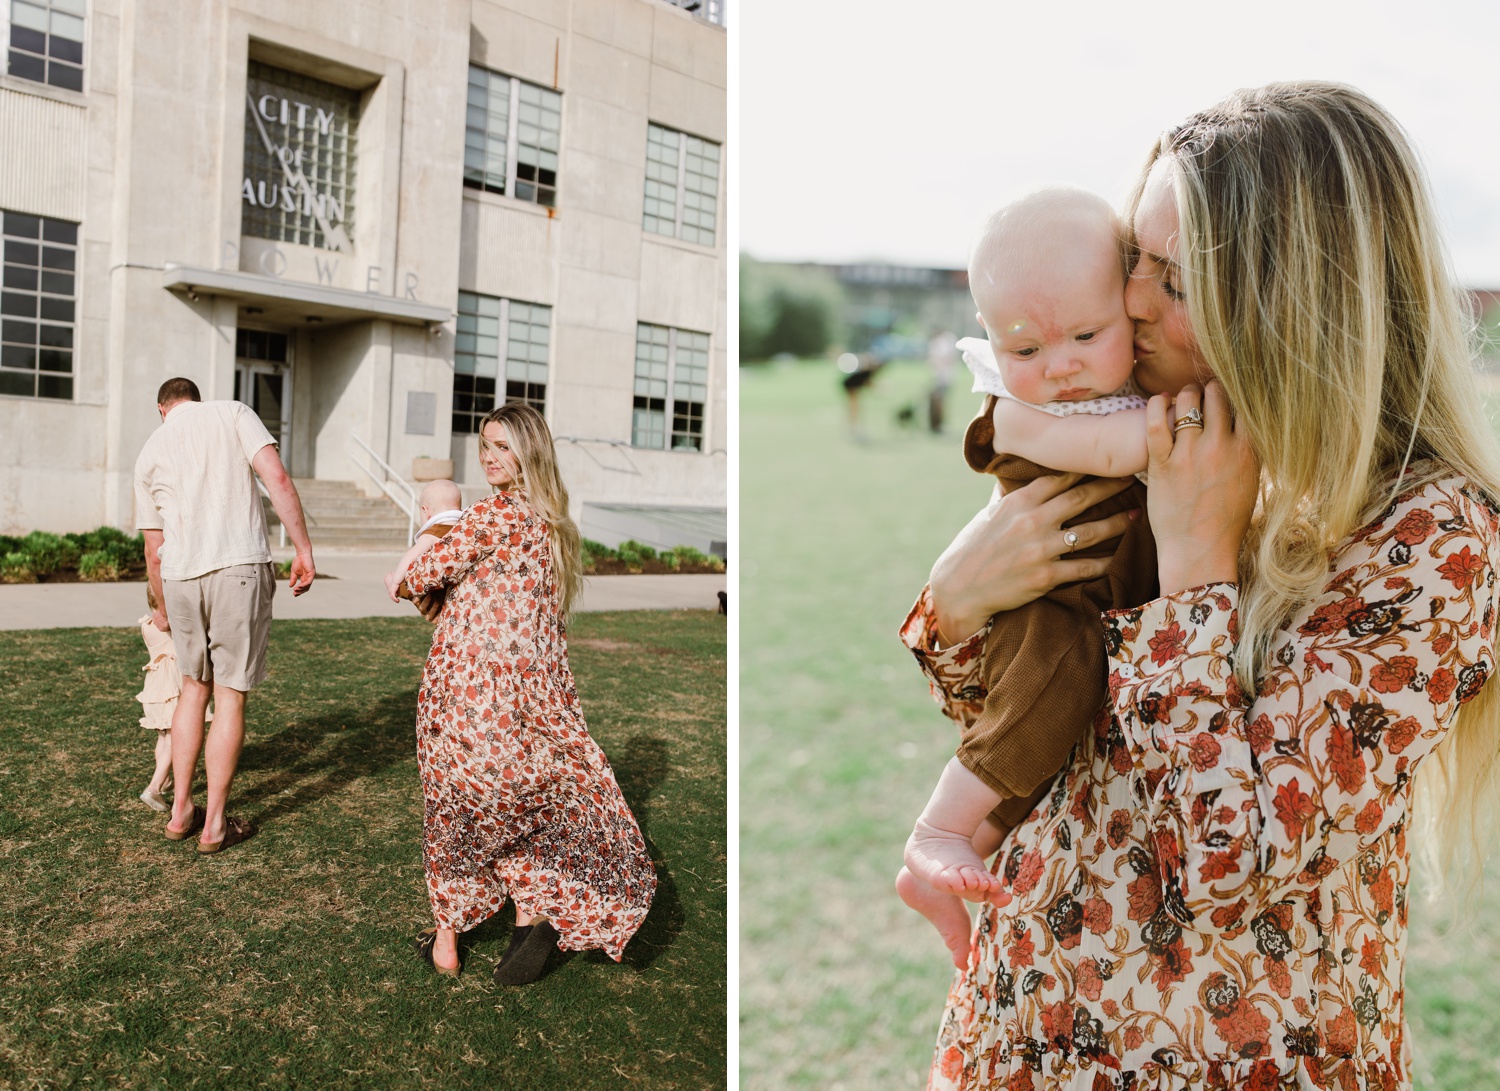 Austin family photography at Seaholm Power Plant